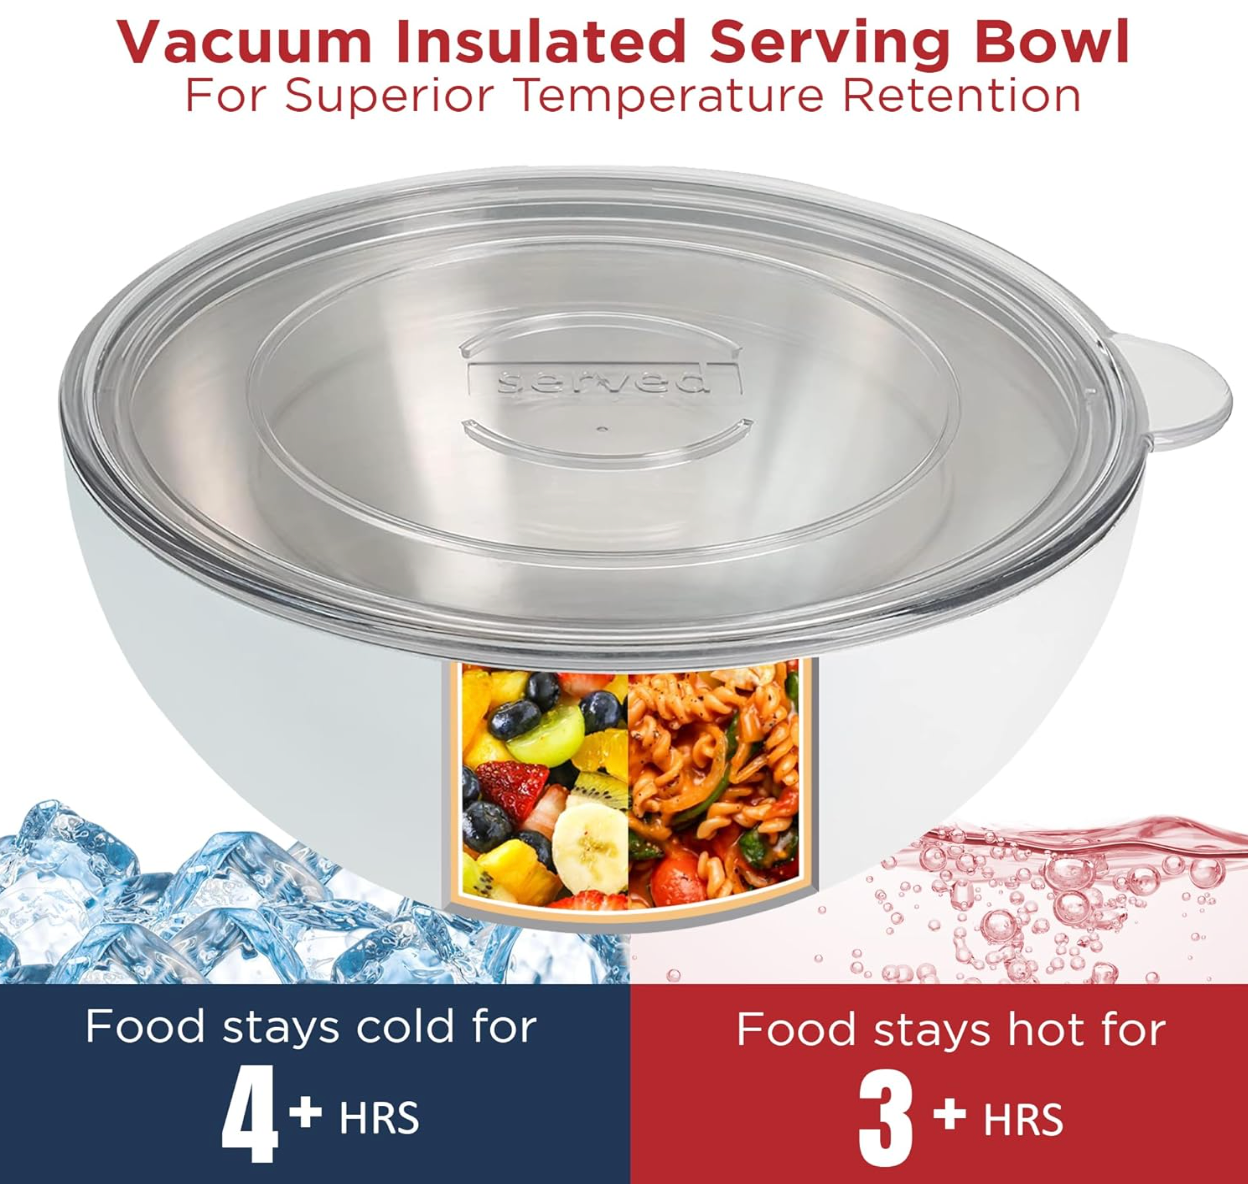 Vacuum-insulated bowls from Served